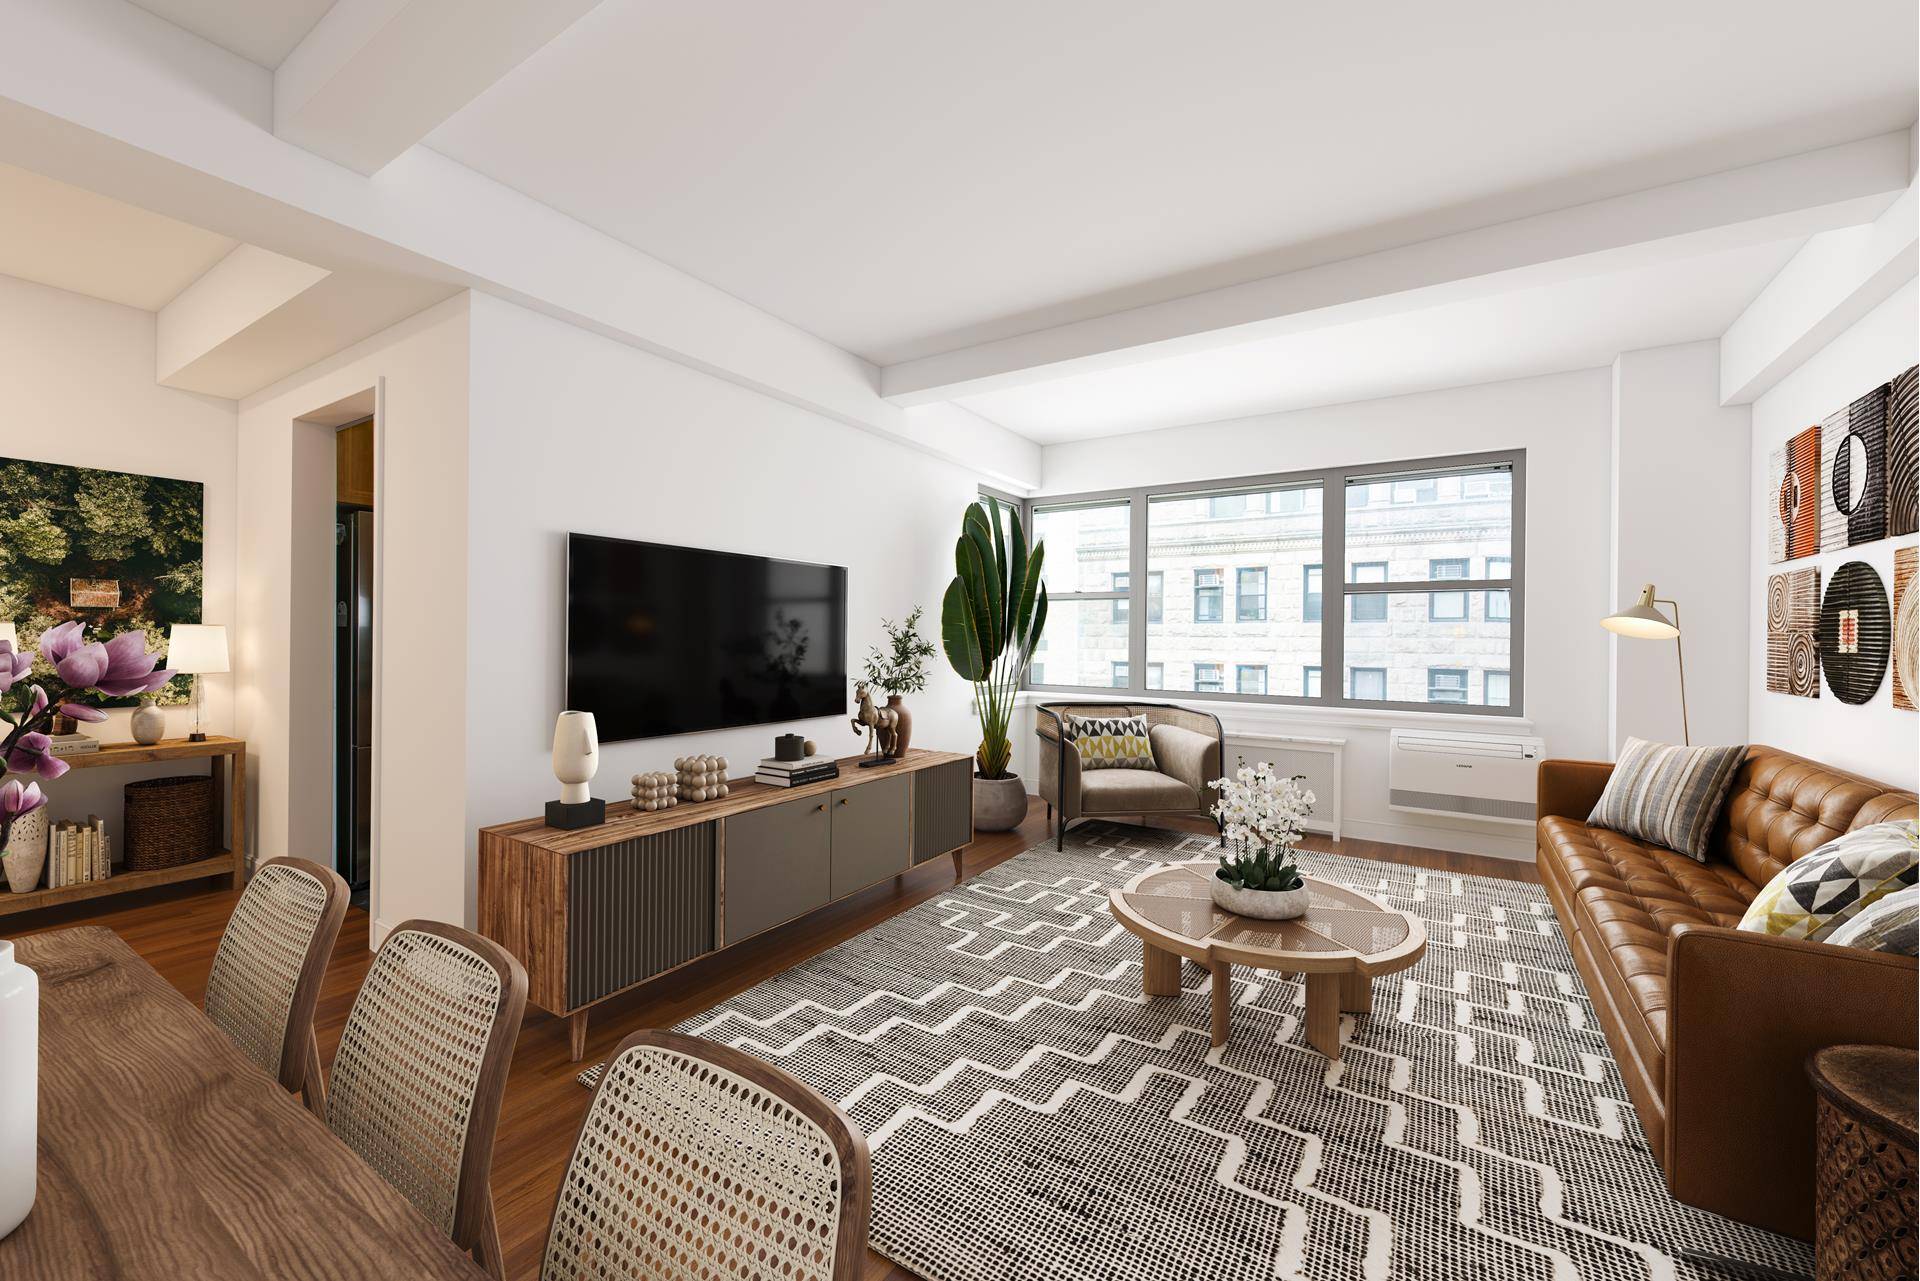 7 Lexington Avenue 9C is a chic, over sized, alcove studio in a full service, doorman building on one of the most beautiful blocks in the city.